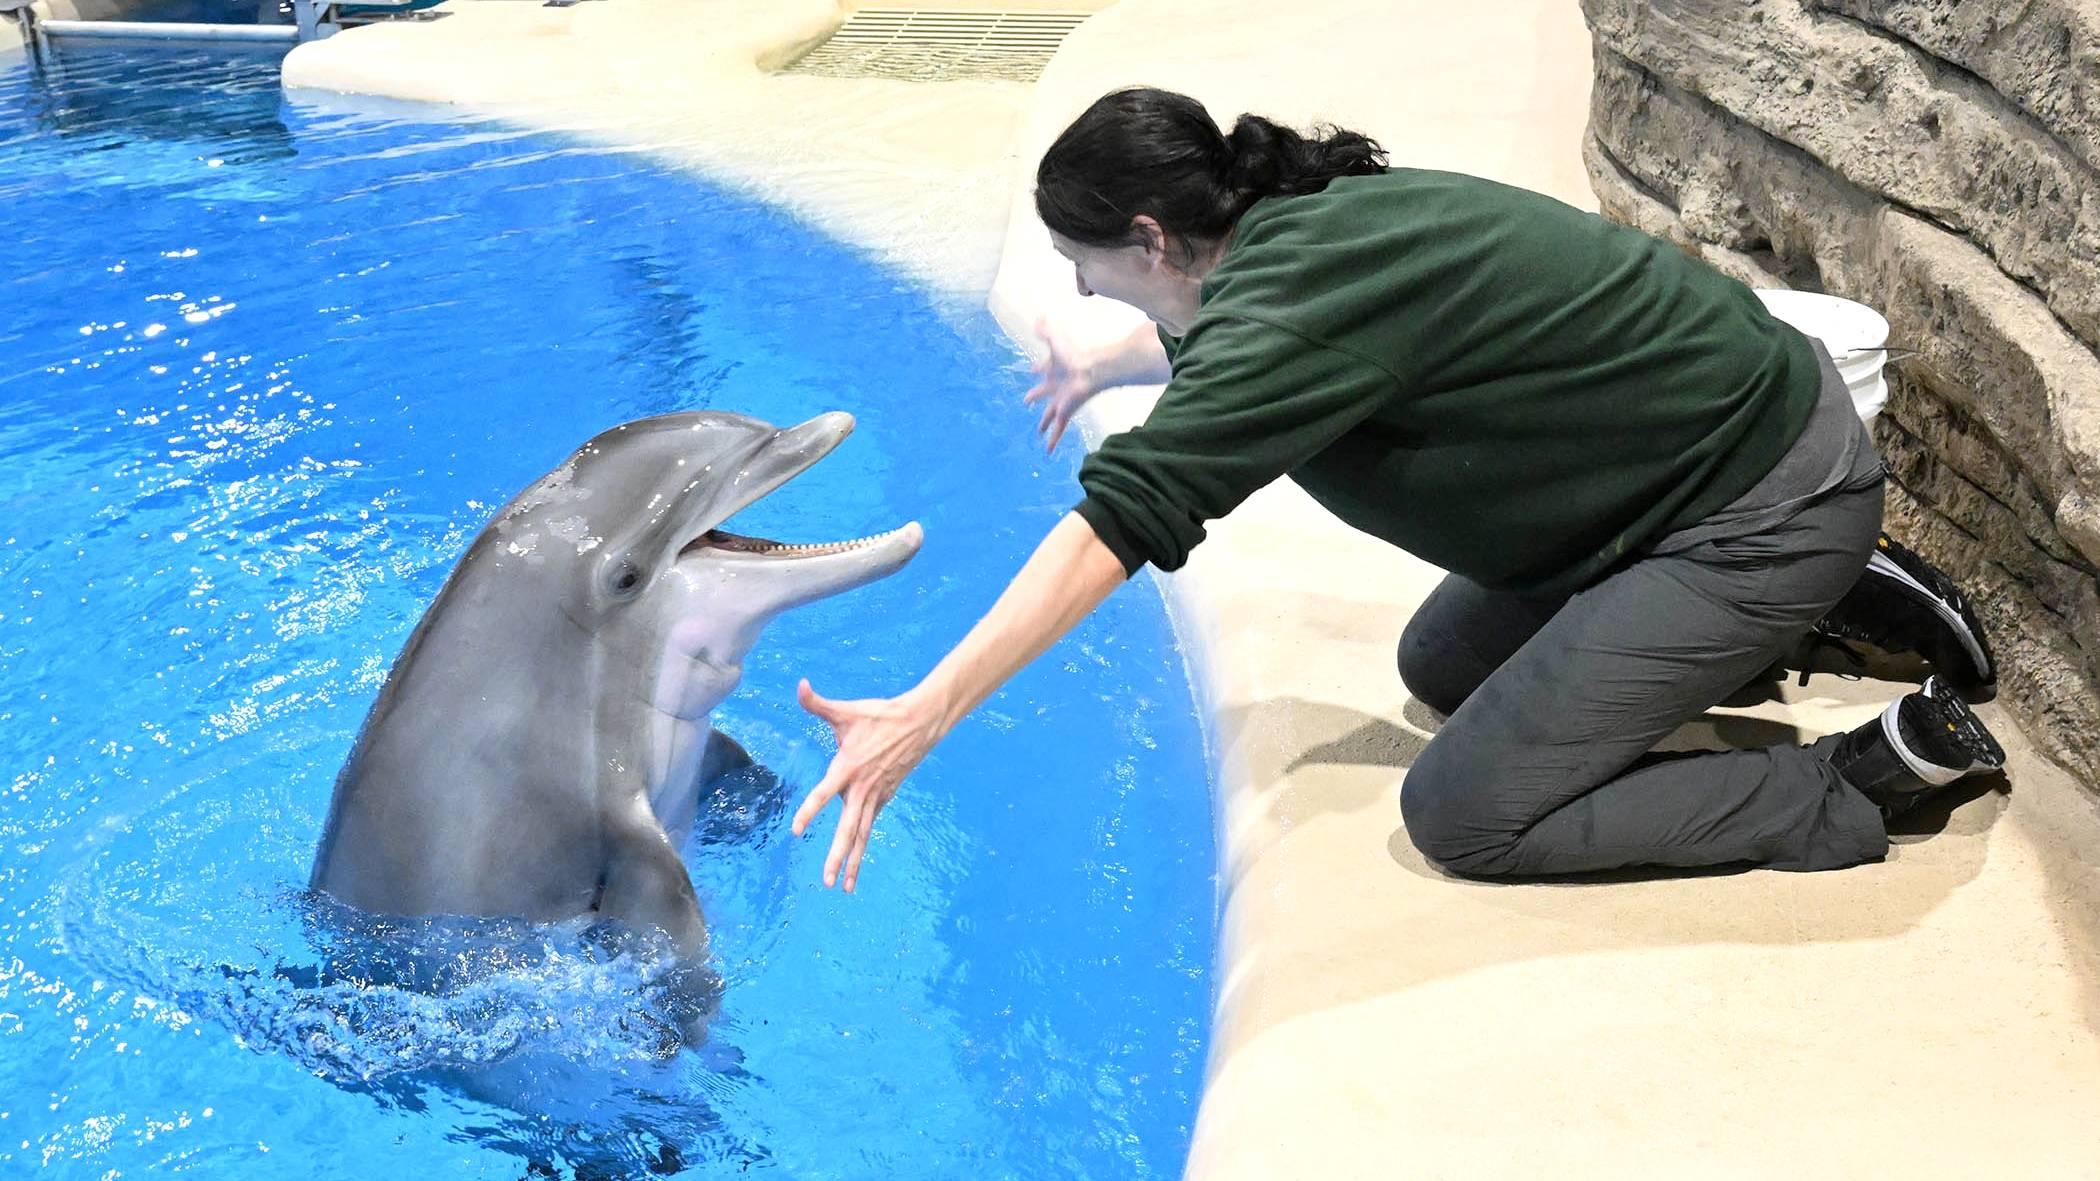 Tapeko, one of Brookfield Zoo’s bottlenose dolphins, gets a big welcome home from Melissa Zabojnik, a senior animal care specialist. (Jim Schulz / CZS-Brookfield Zoo)